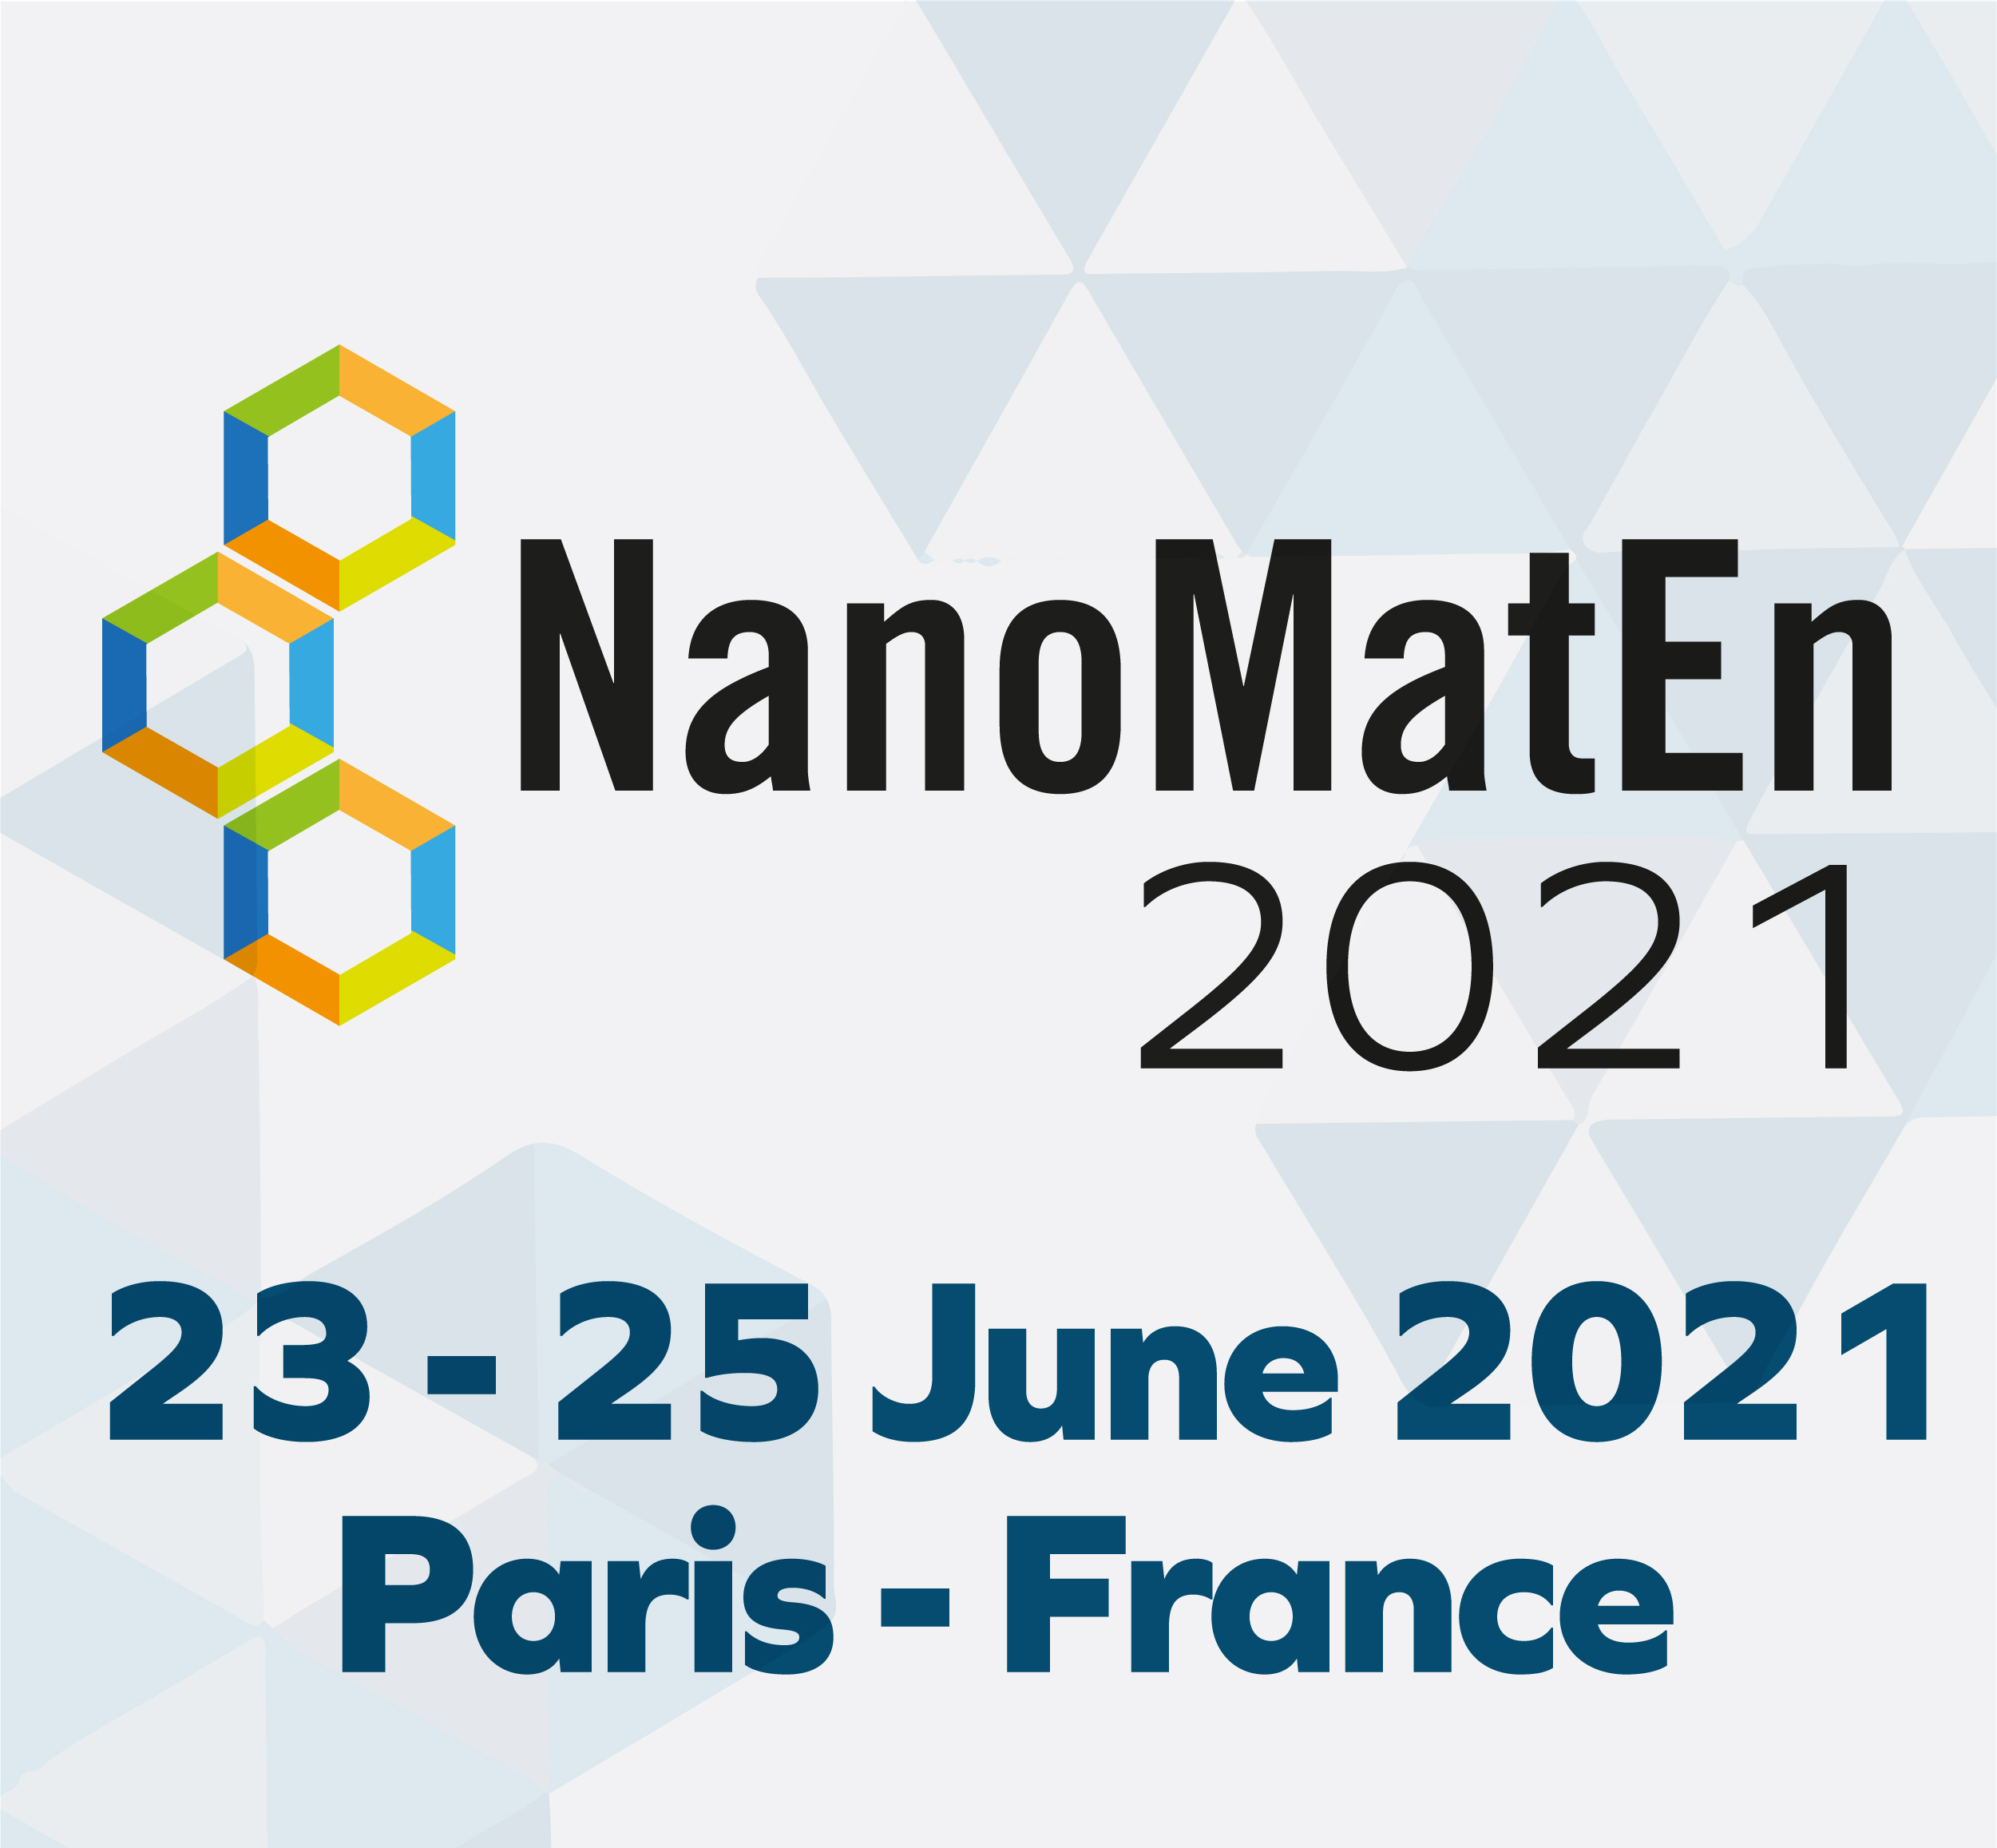 The 6th edition of the International conference and exhibition on NanoMaterials for Energy & Environment - NanoMatEn 2021